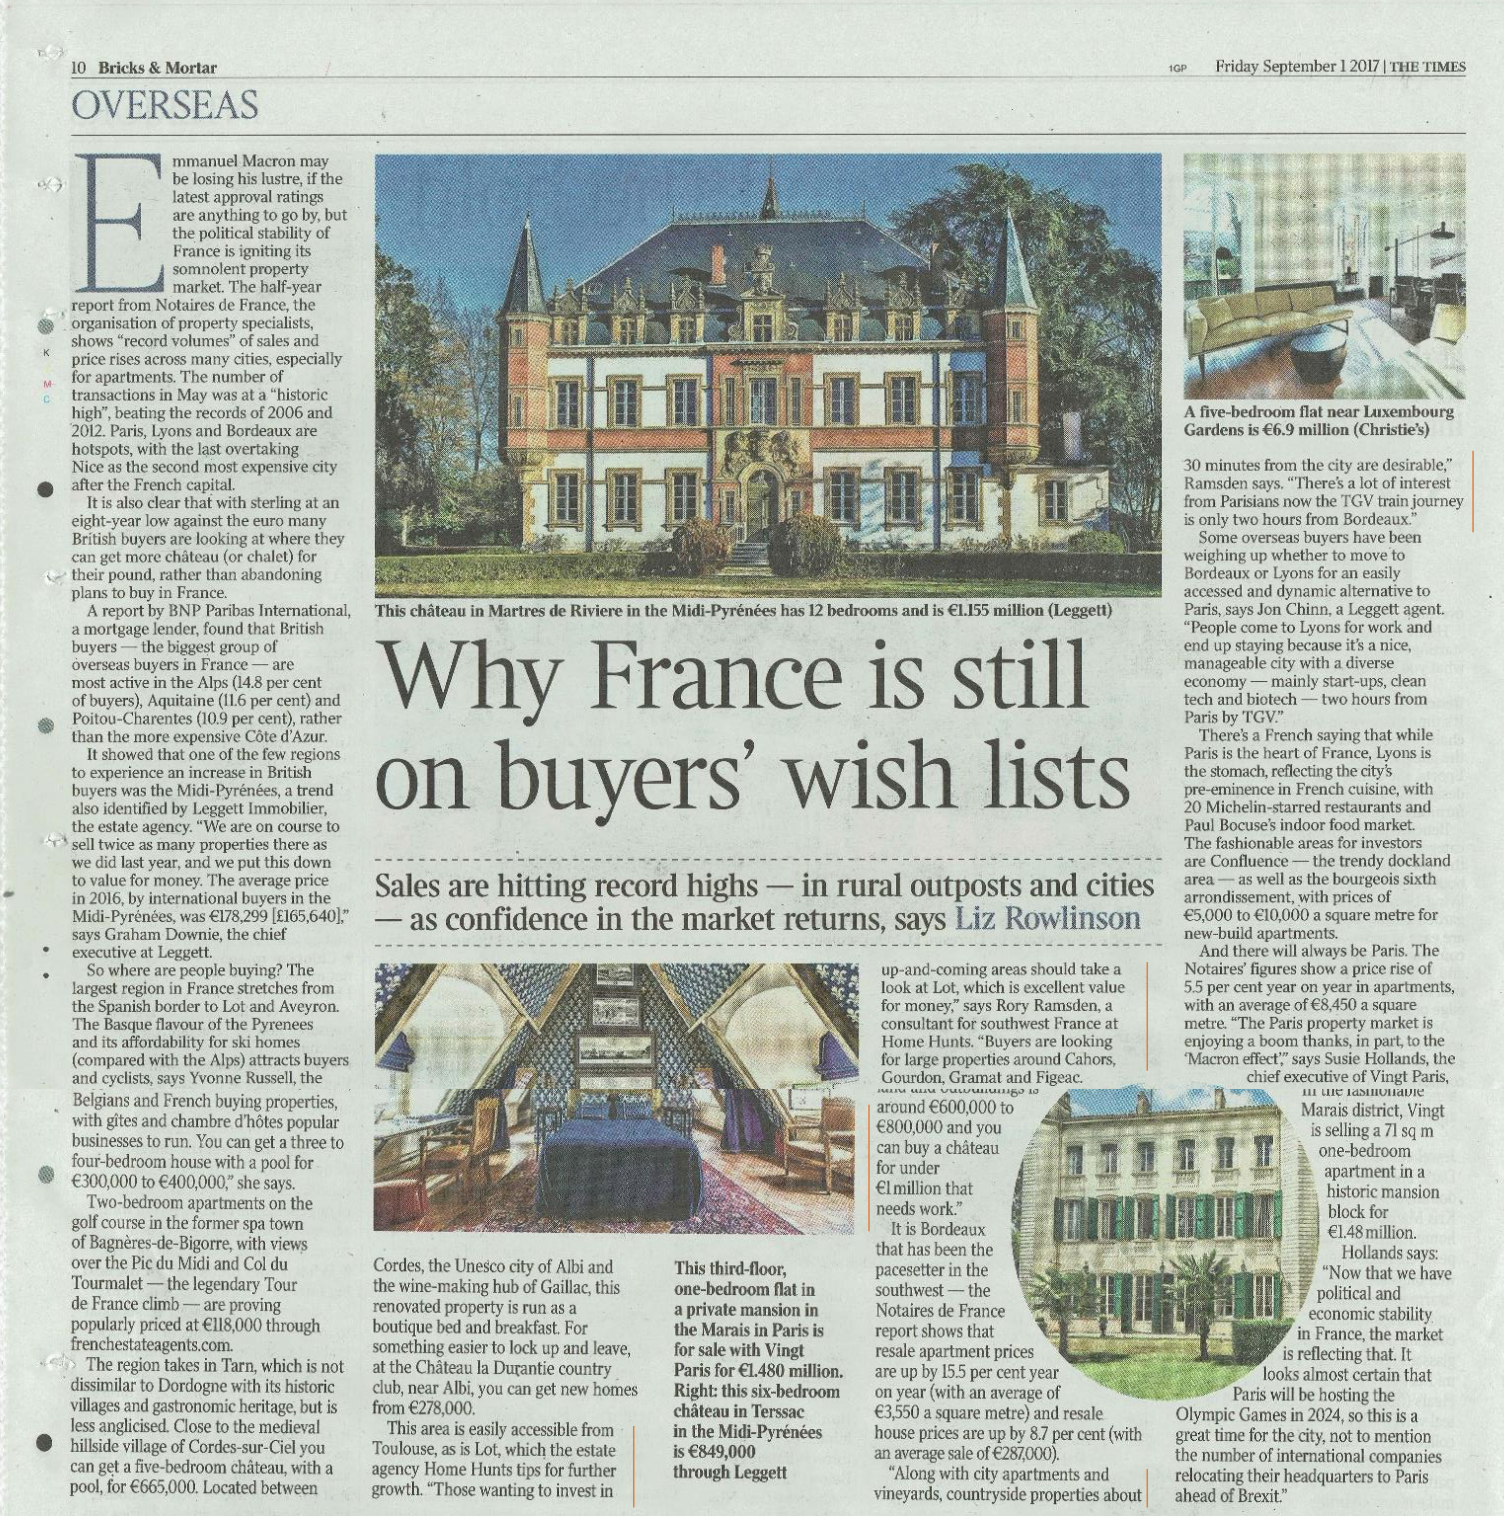 The Times – Why French property is still on buyers’ wish lists…..